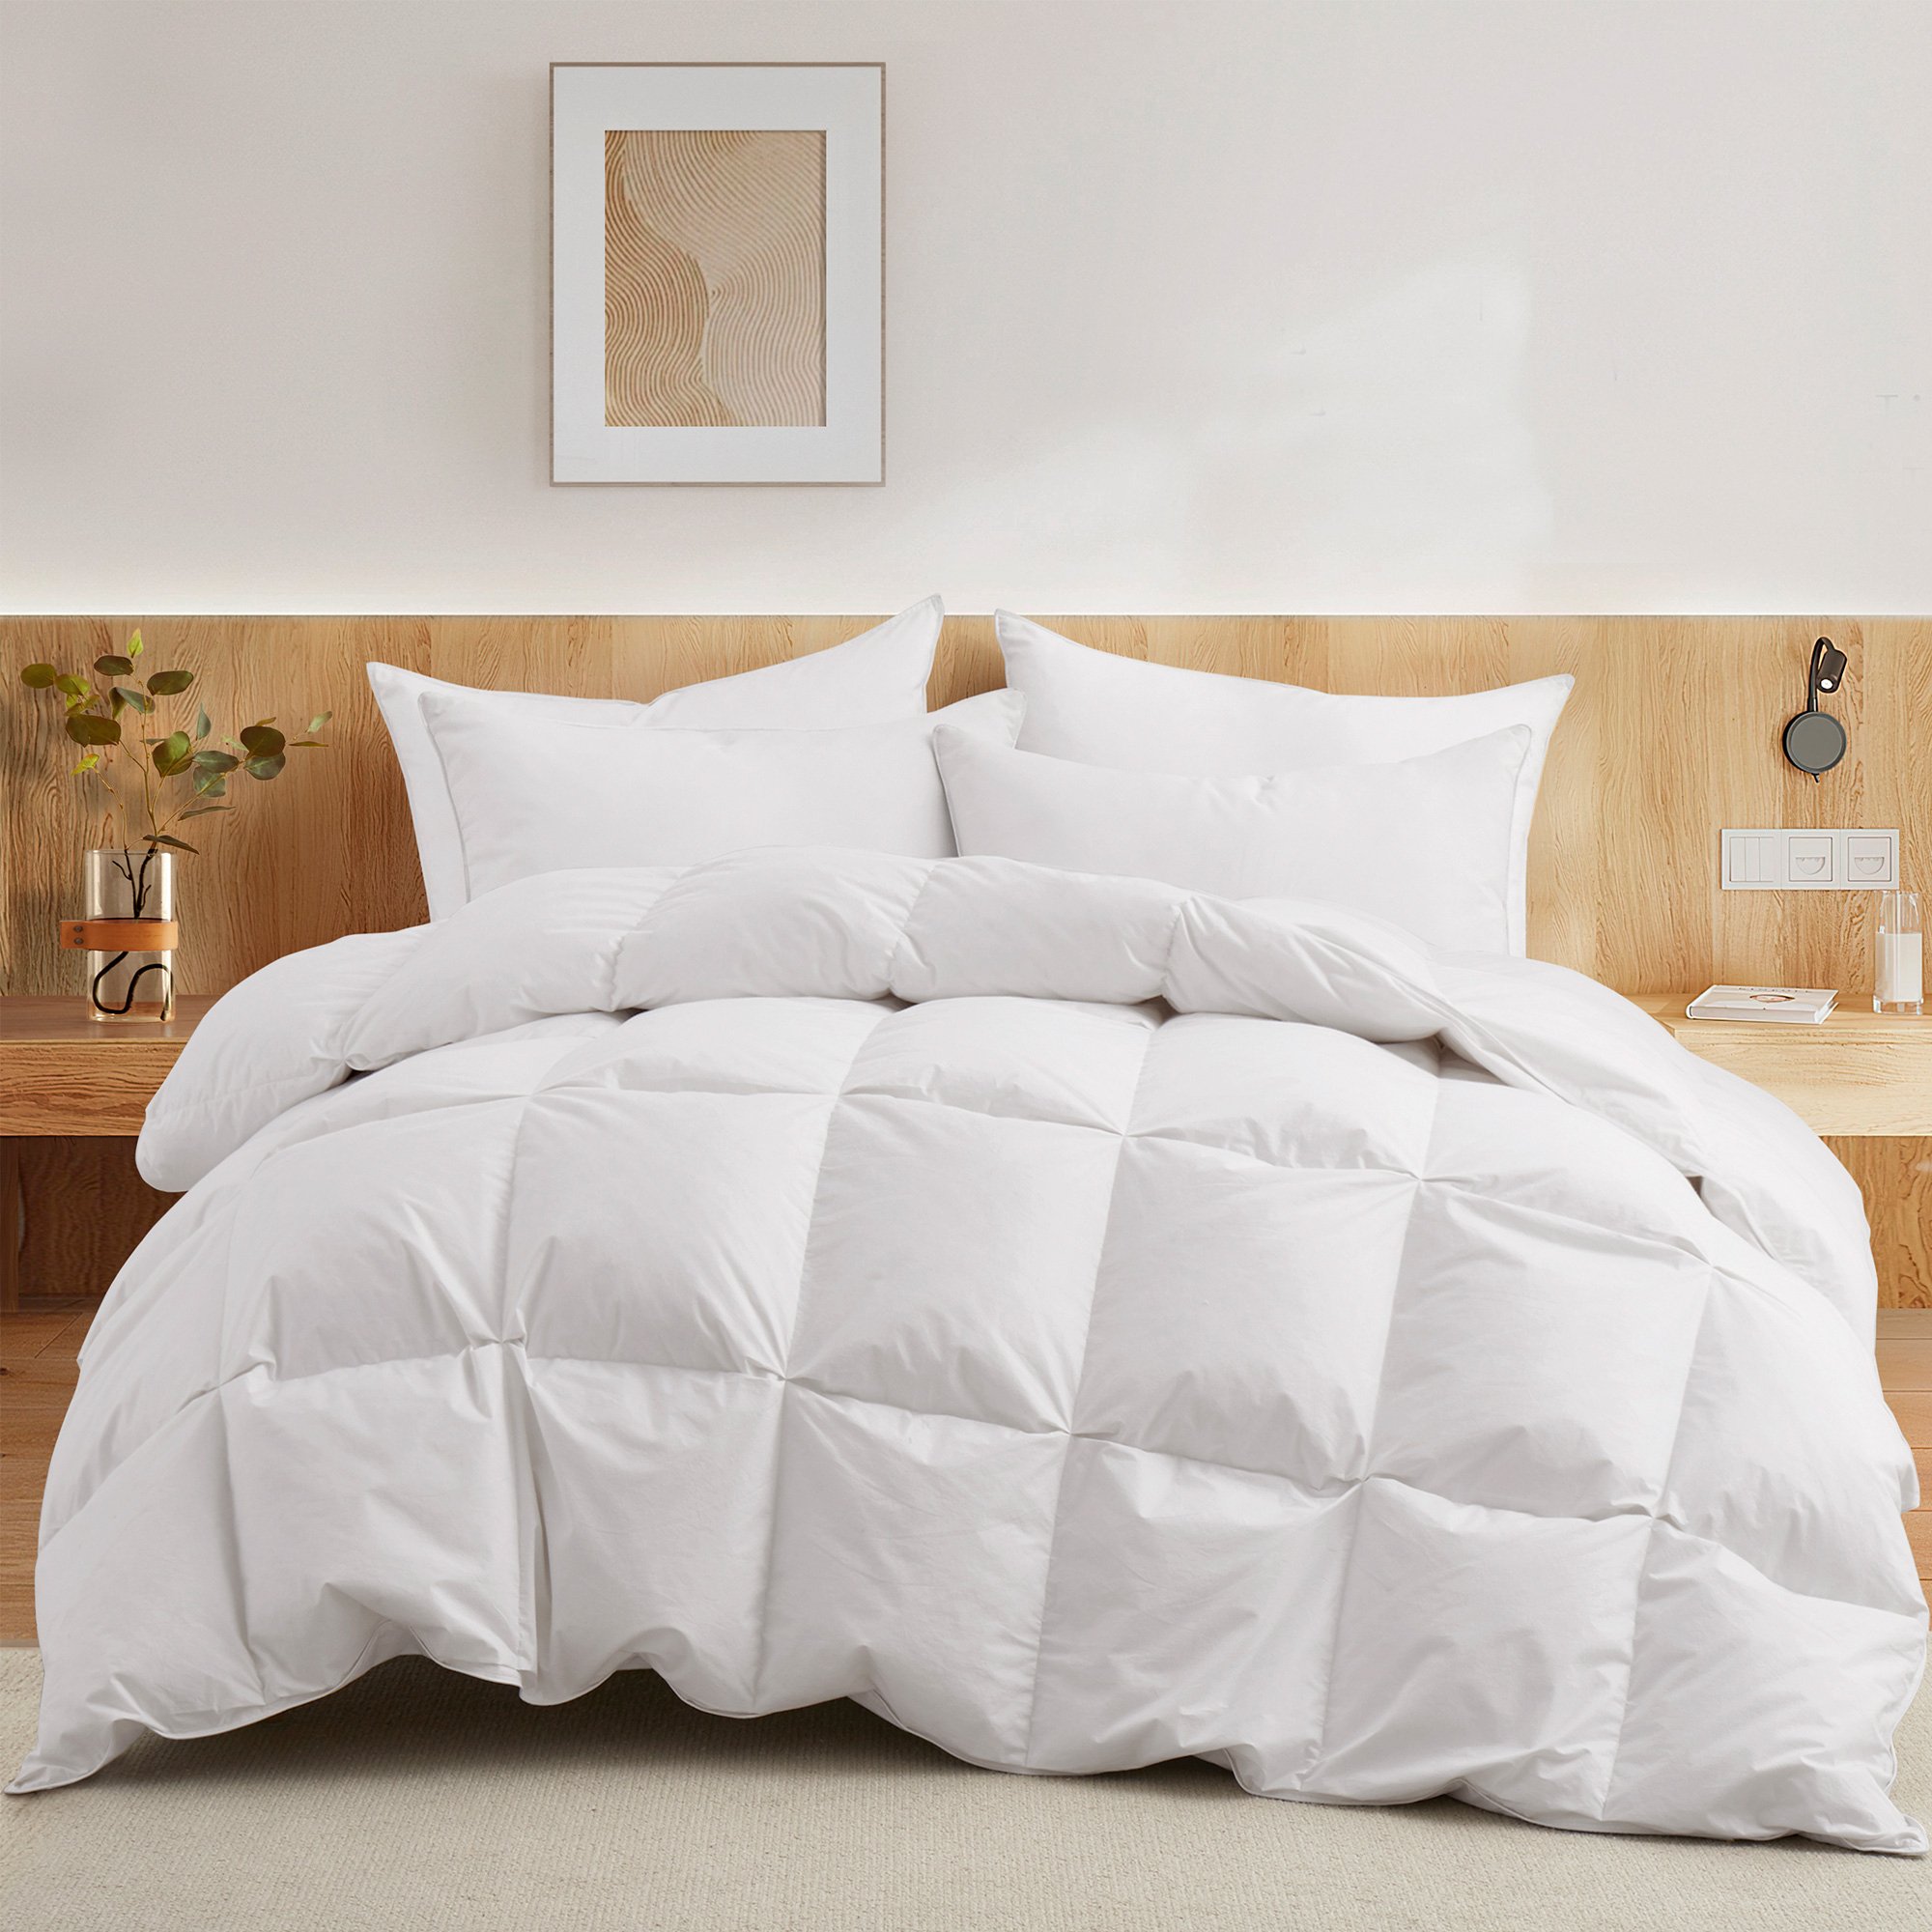 All Seasons Goose Down Comforter With Cotton Cover Baffled Box Design-Luxury Duvet Insert - Twin-68*90